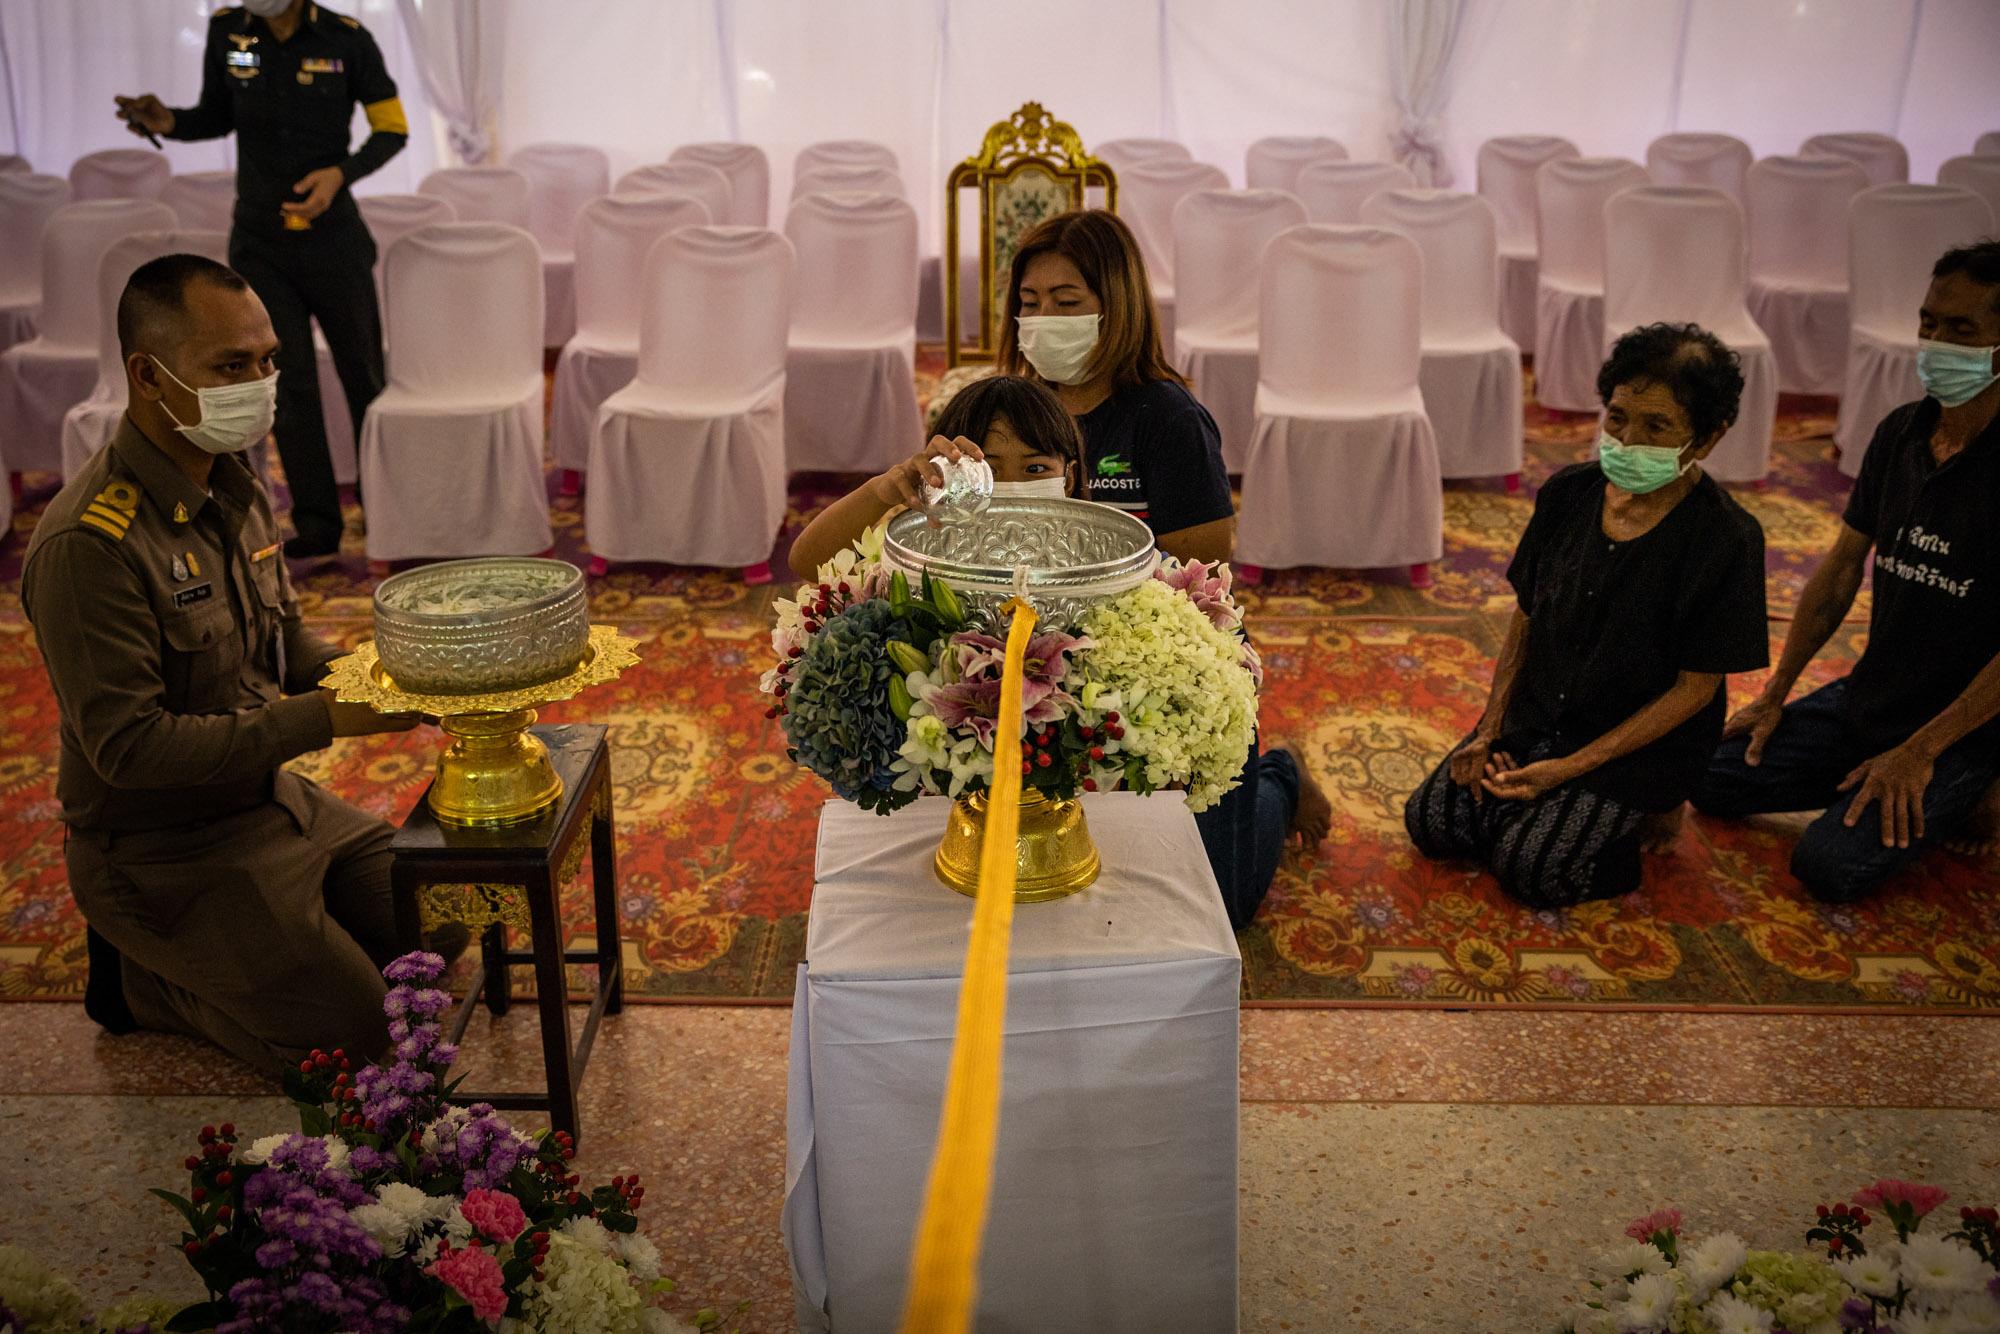 Shooting in Nong Bua Lamphu: The New York Times - A young girl participates in a purification ceremony for...